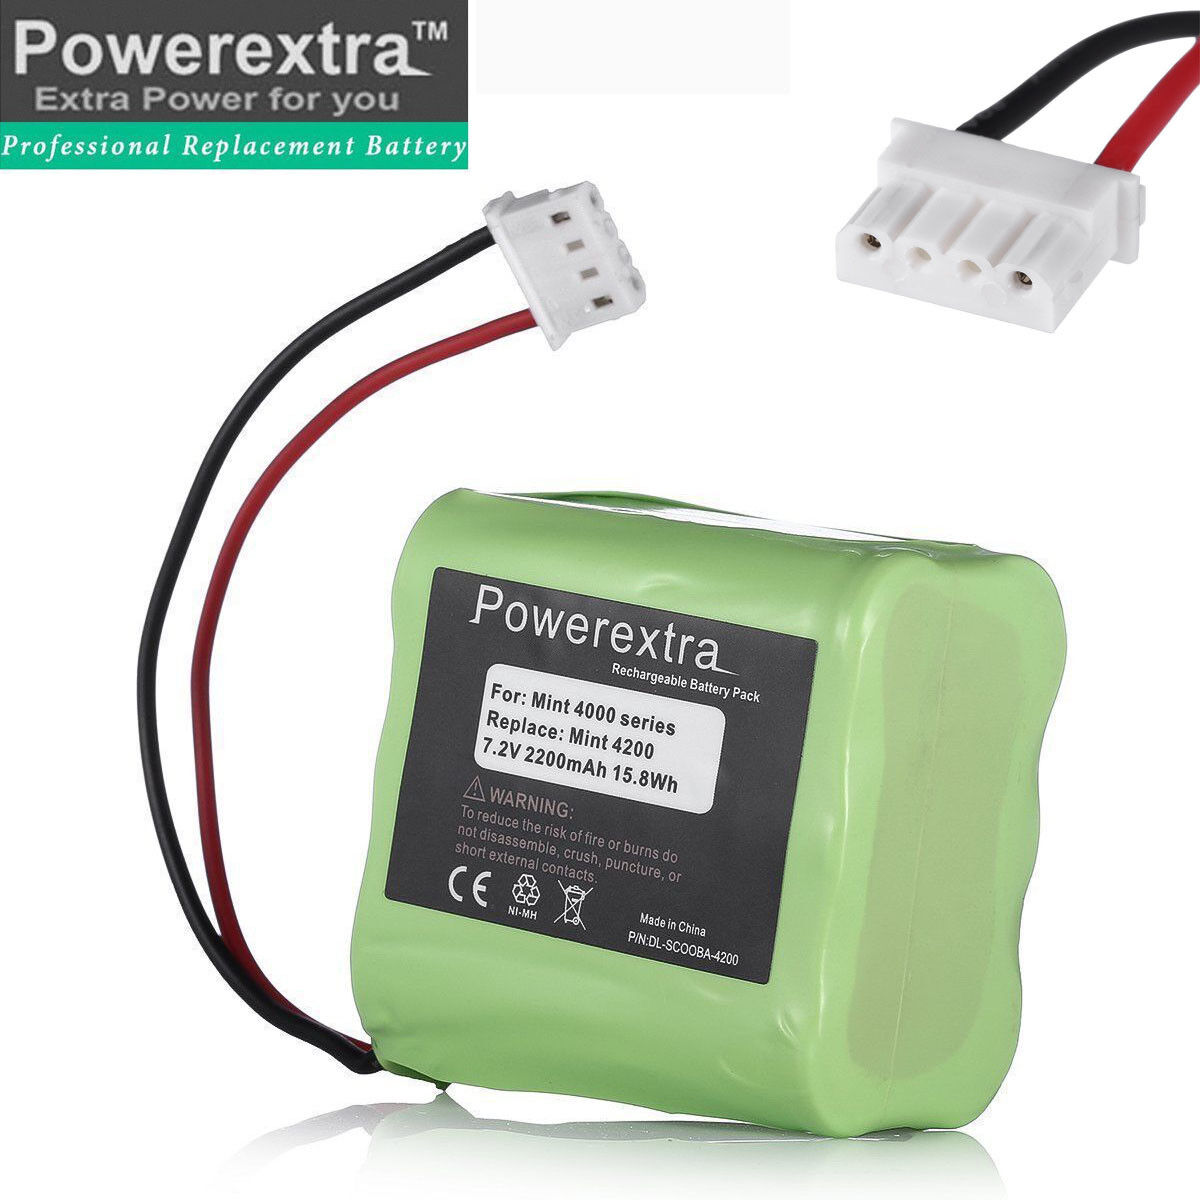 7.2V Replacement Battery for iRobot Braava 320/321 Mint 4200 4205 Vacuum Cleaner Powerextra Does not apply